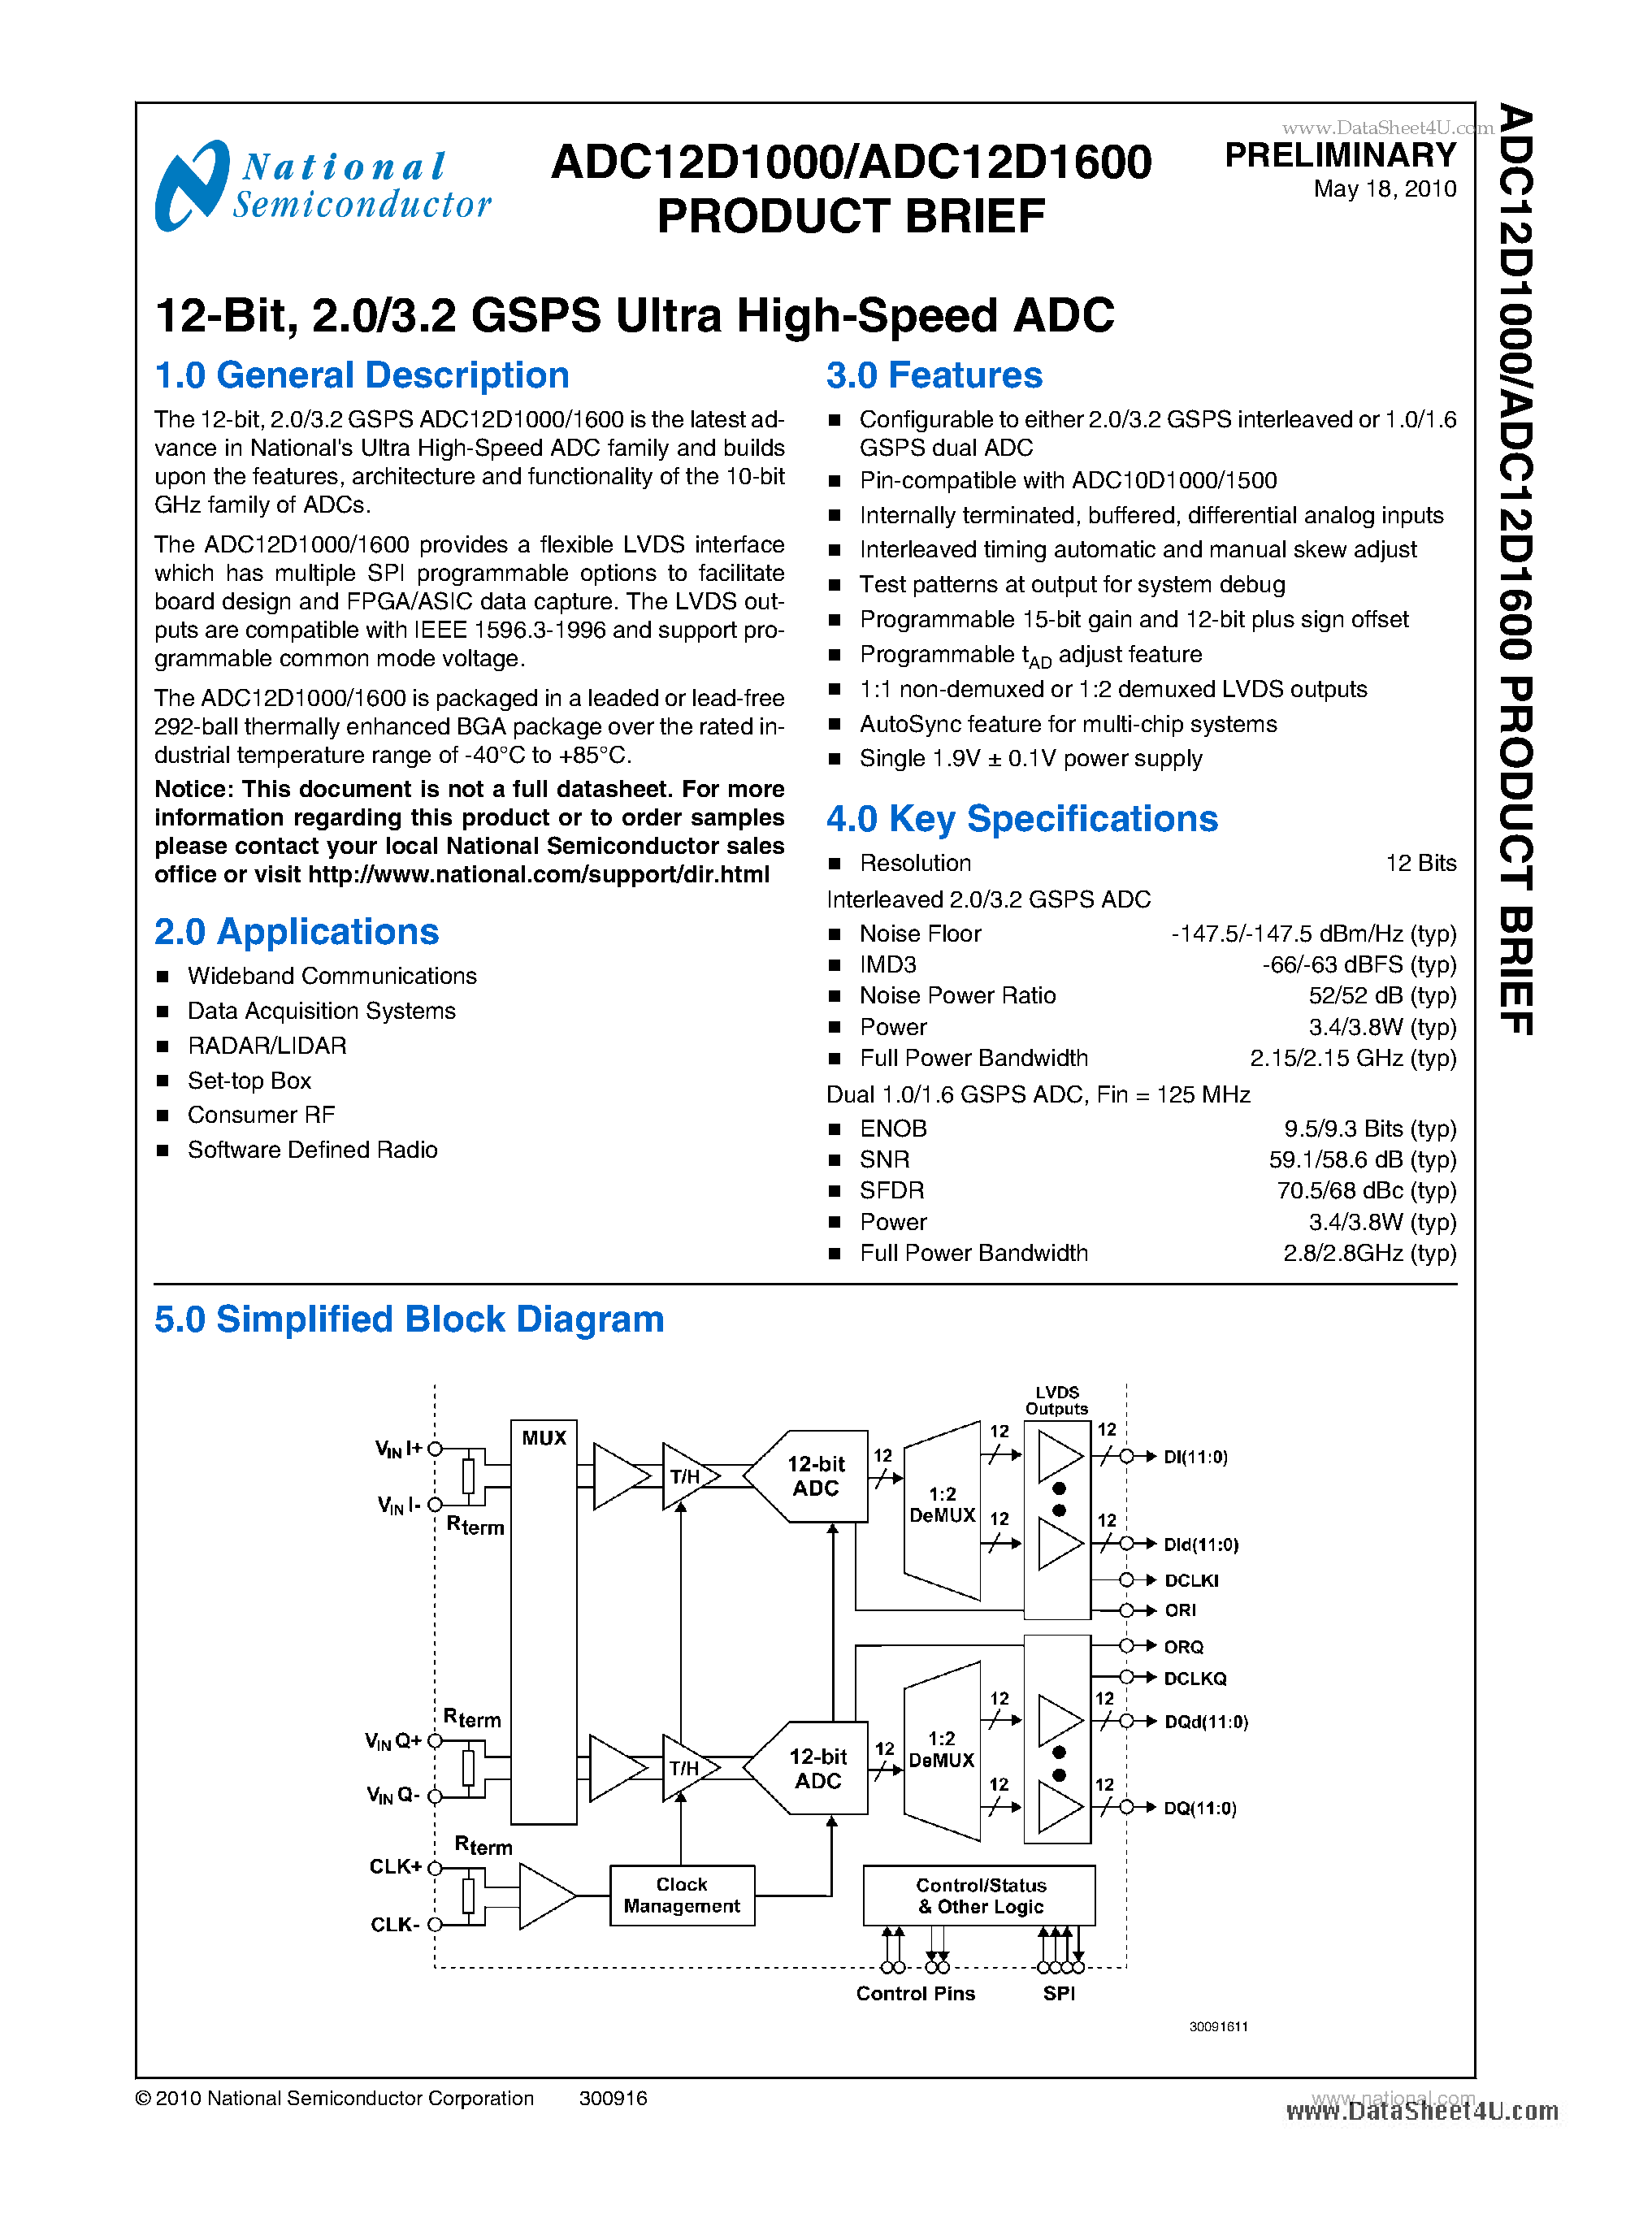 Datasheet ADC12D1000 - (ADC12D1000 / ADC12D1600) 2.0/3.2 GSPS Ultra High-Speed ADC page 1